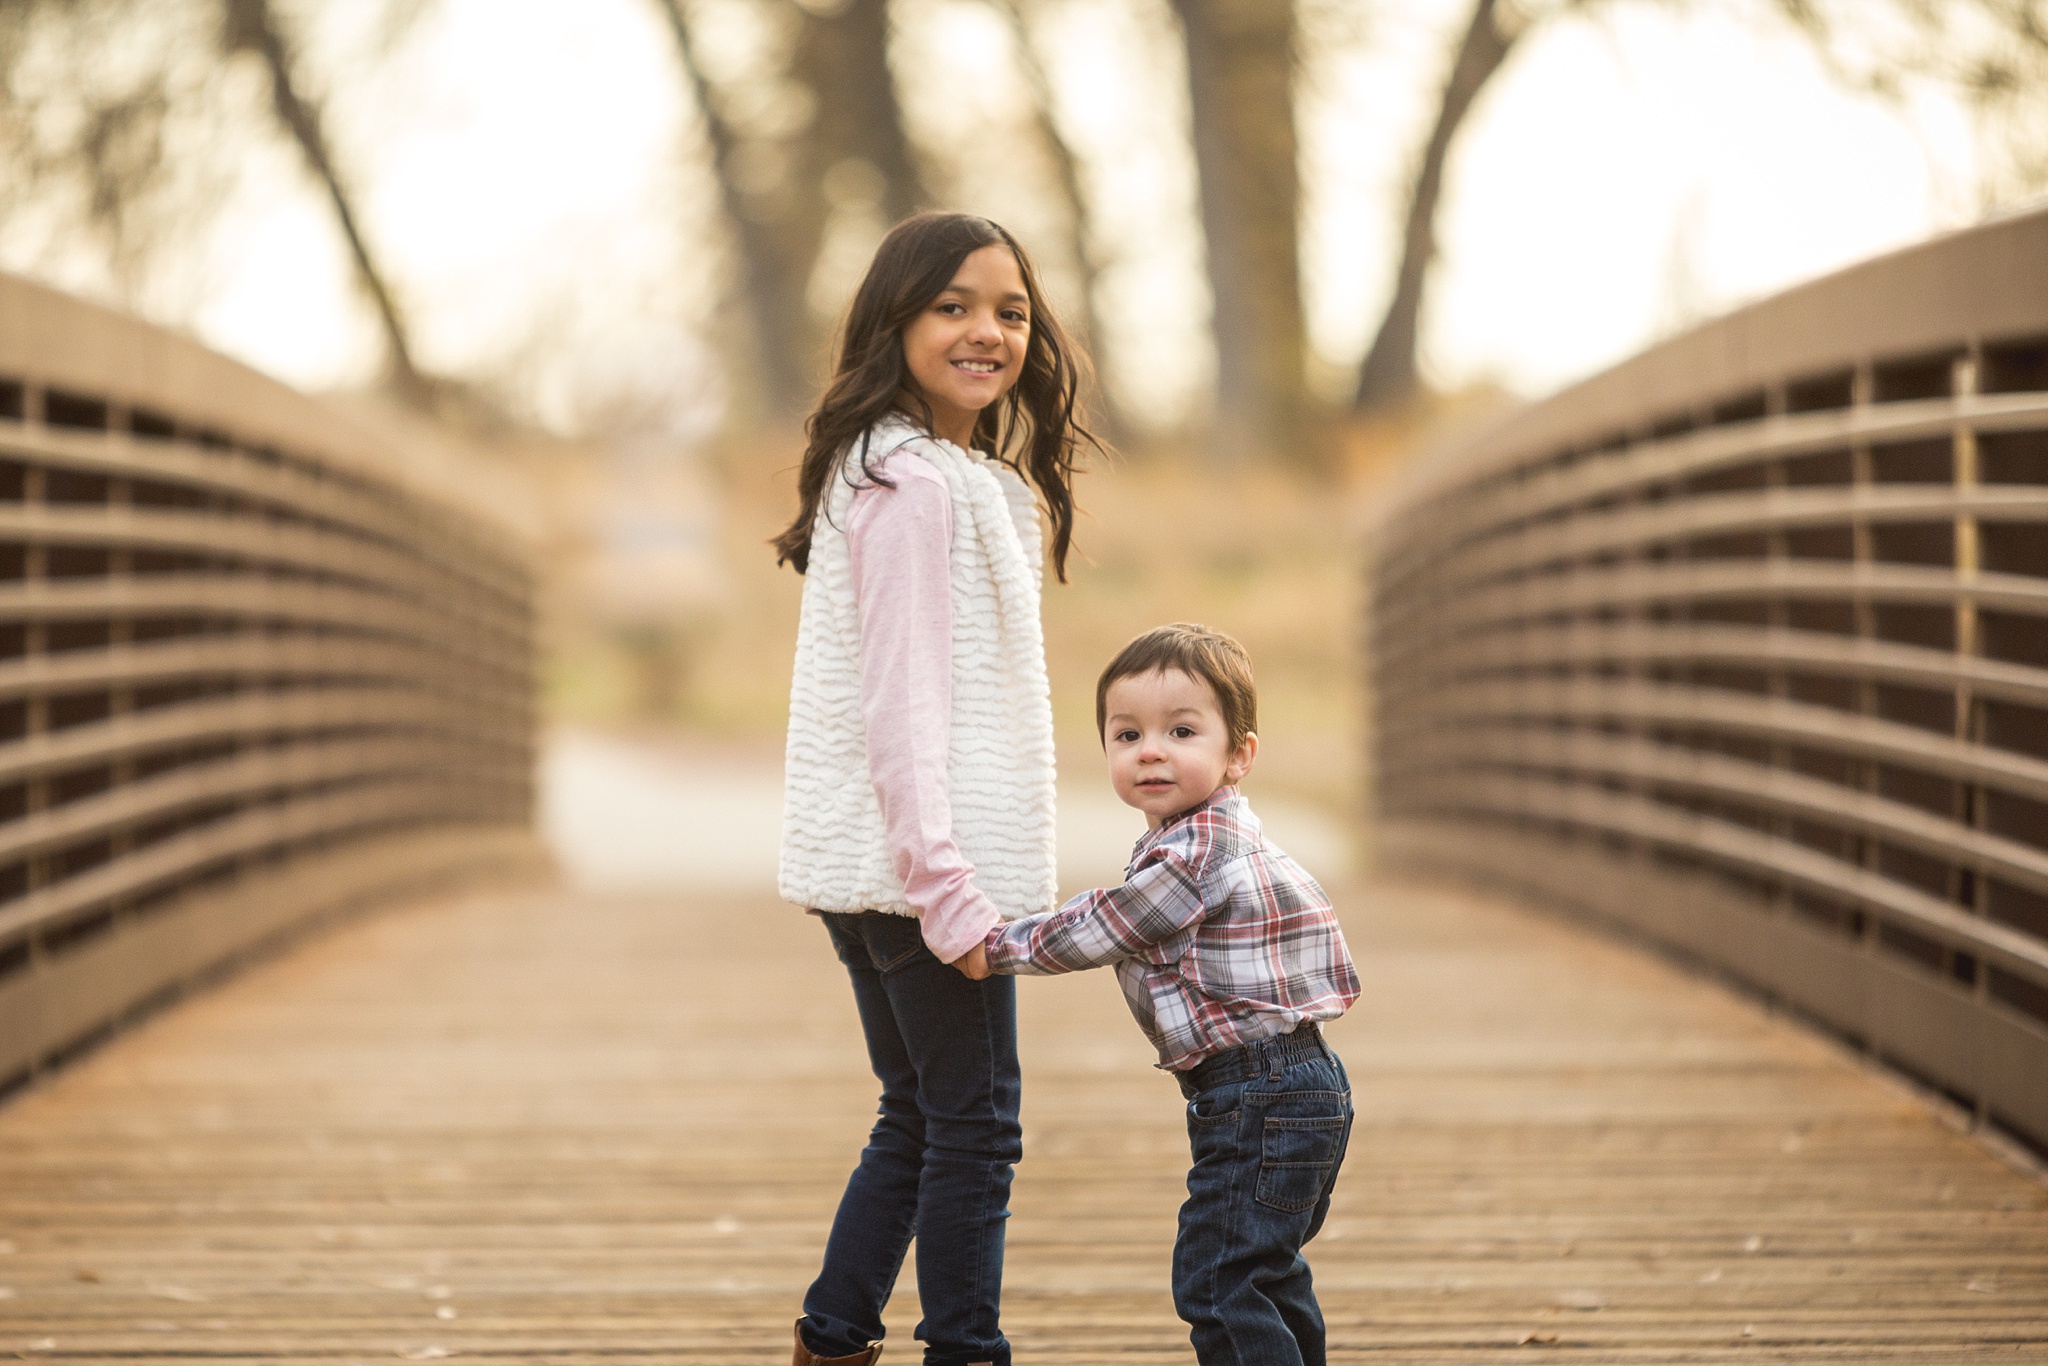 Brother & Sister playing during fall family portraits. The Aguayo Family’s Fall Family Photo Session at Golden Ponds Nature Area by Colorado Family Photographer, Jennifer Garza. Golden Ponds Nature Area Family Photographer, Golden Ponds Nature Area, Golden Ponds, Golden Ponds Family Photographer, Longmont Family Photography, Longmont Family Photographer, Colorado Family Photos, Colorado Family Photographer, Colorado Fall Photos, Fall Photos